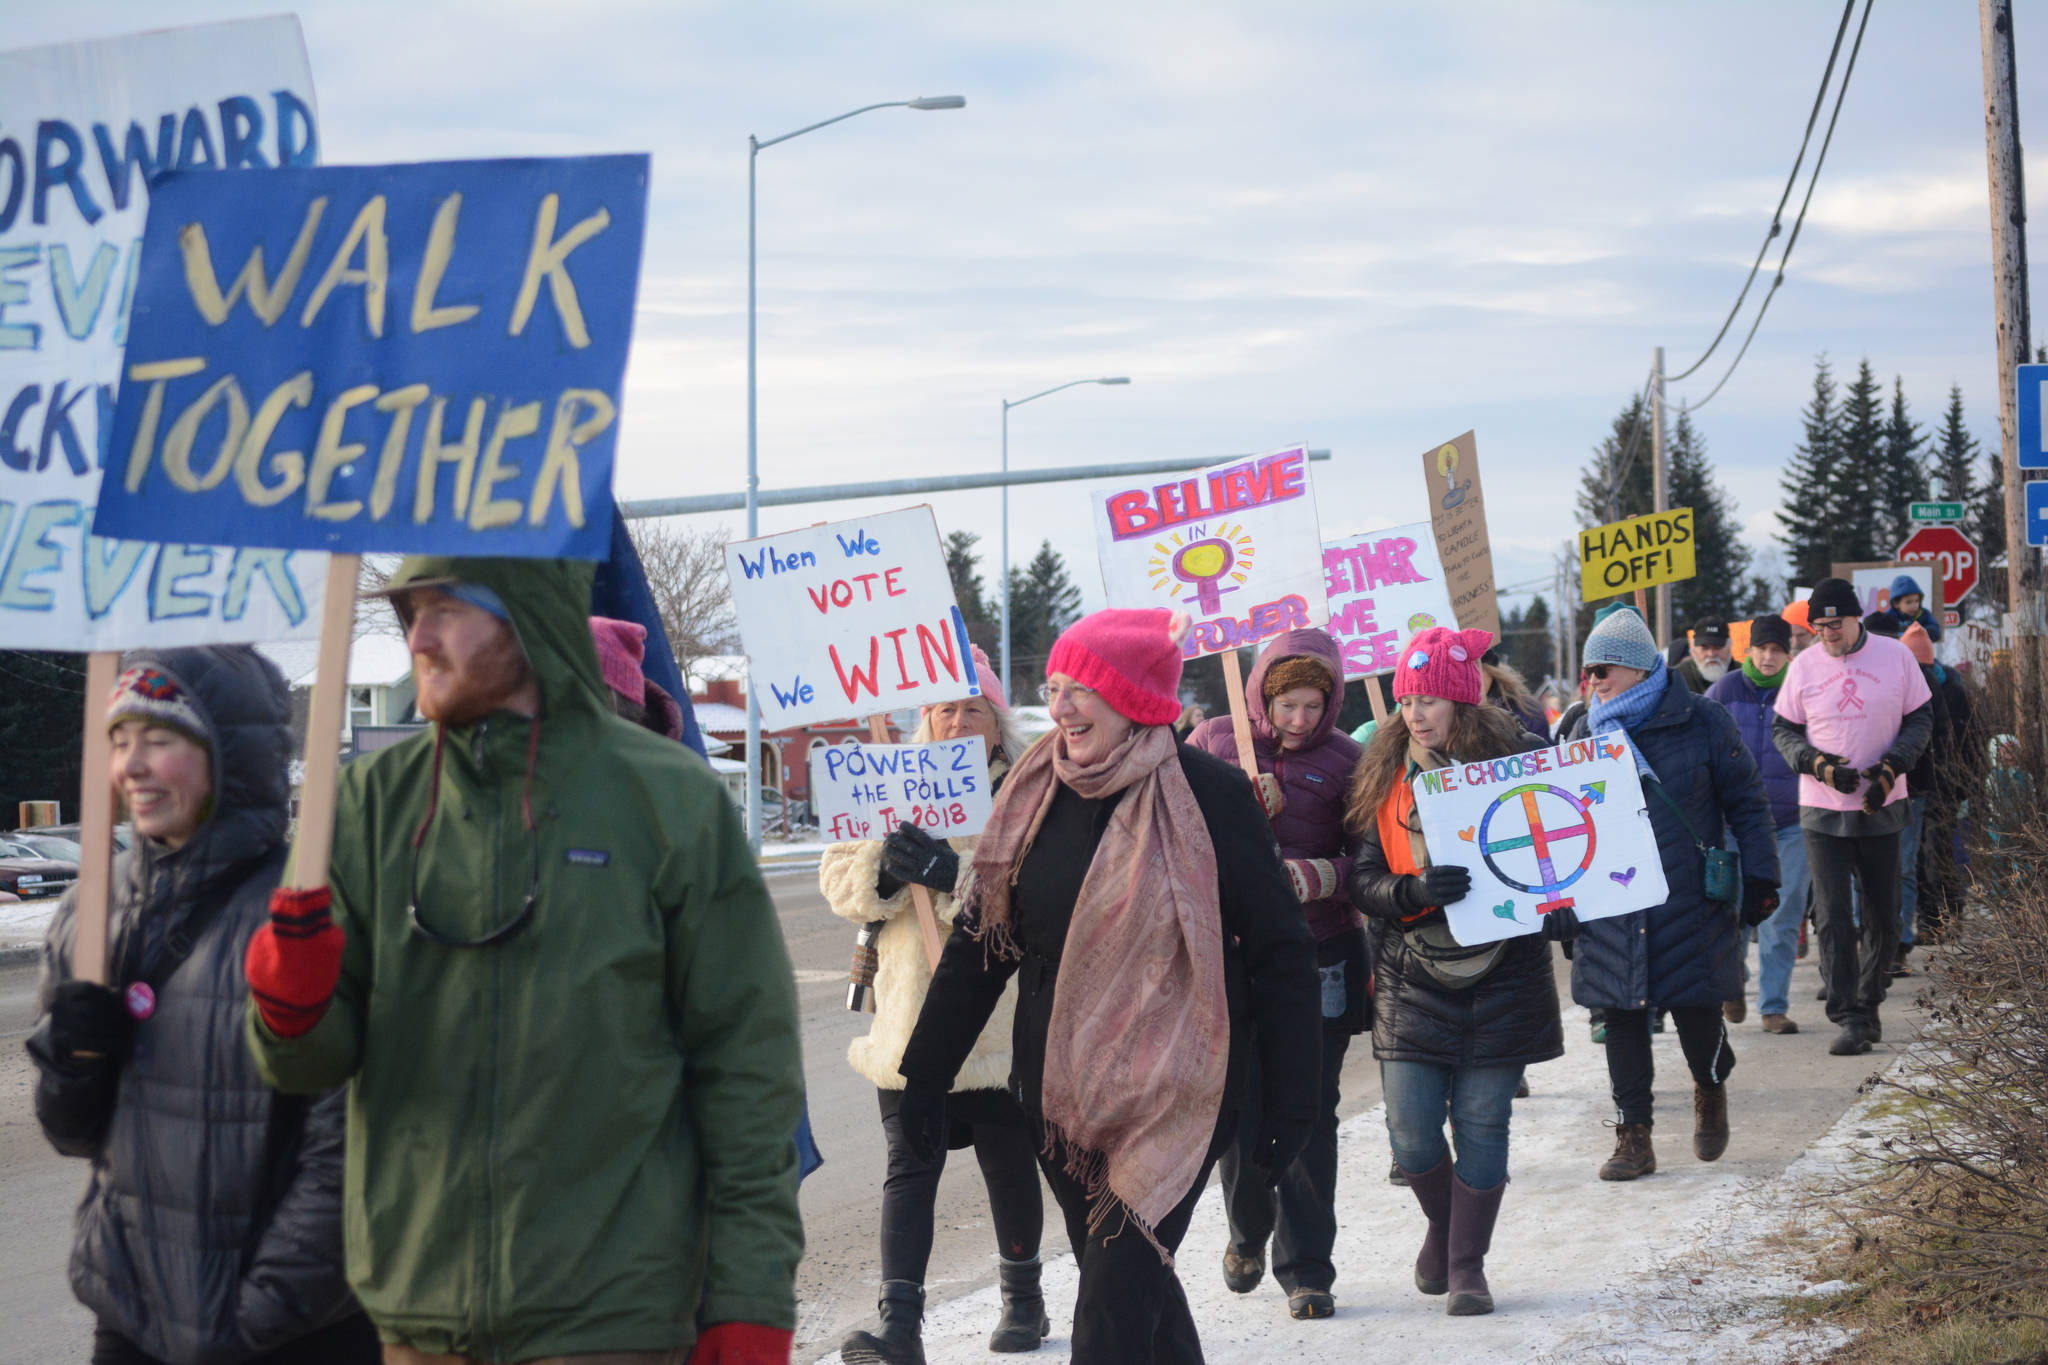 A line of protesters curves along Pioneer Avenue in the Homer March for Women on Saturday. About 700 people walked in the march along Pioneer Avenue on Jan. 20, 2018, in Homer, Alaska. The group of marchers extended from Main Street to Kachemak Way. (Photo by Michael Armstrong/Homer News)                                A line of protesters curves along Pioneer Avenue at the 2018 Homer March for Women. About 700 people walked in the march along Pioneer Avenue on Jan. 20, 2018, in Homer, Alaska. The group of marchers extended from Main Street to Kachemak Way. (Photo by Michael Armstrong/Homer News)